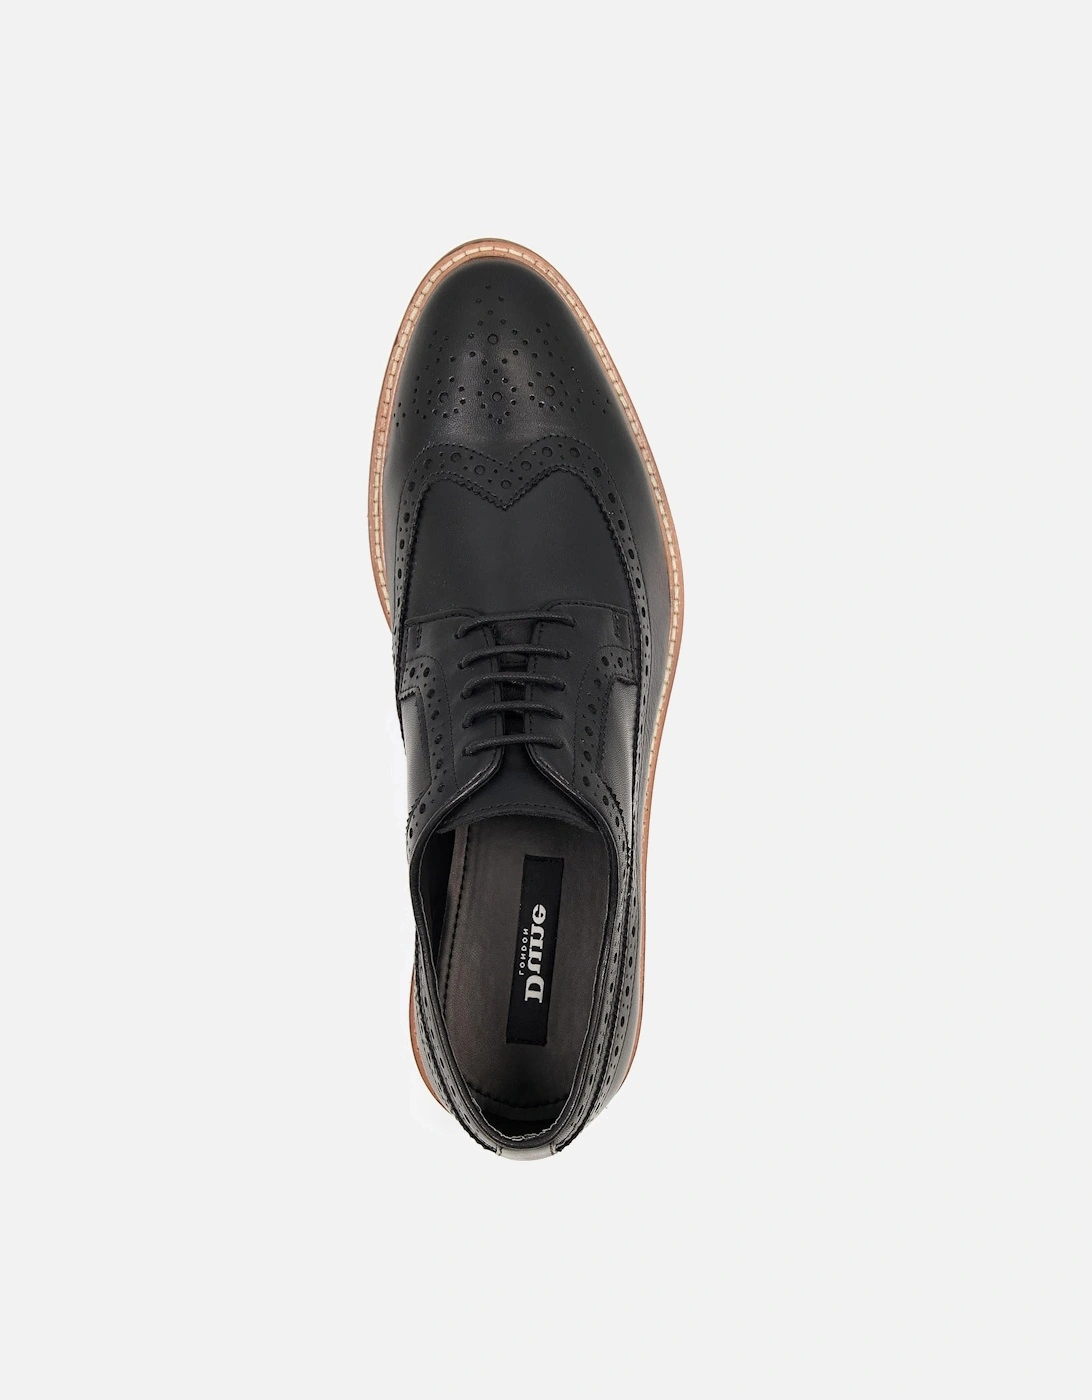 Mens Superior2 - Perforated Leather Lace-Up Brogues